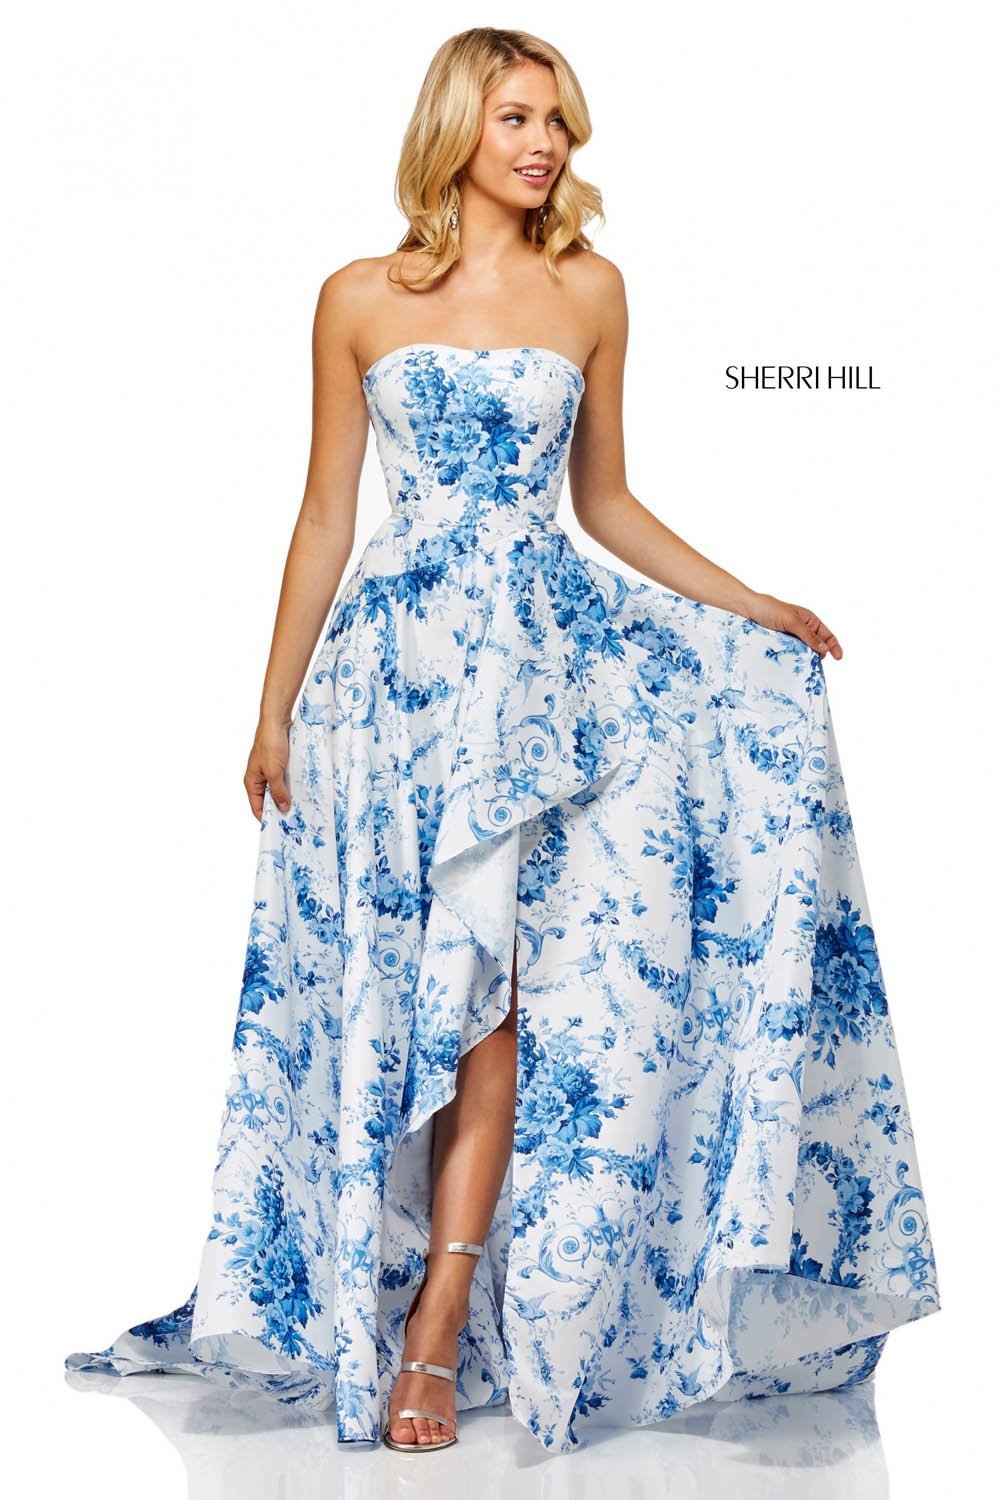 Sherri Hill 52532 dress images in these colors: Ivory Blue Print.